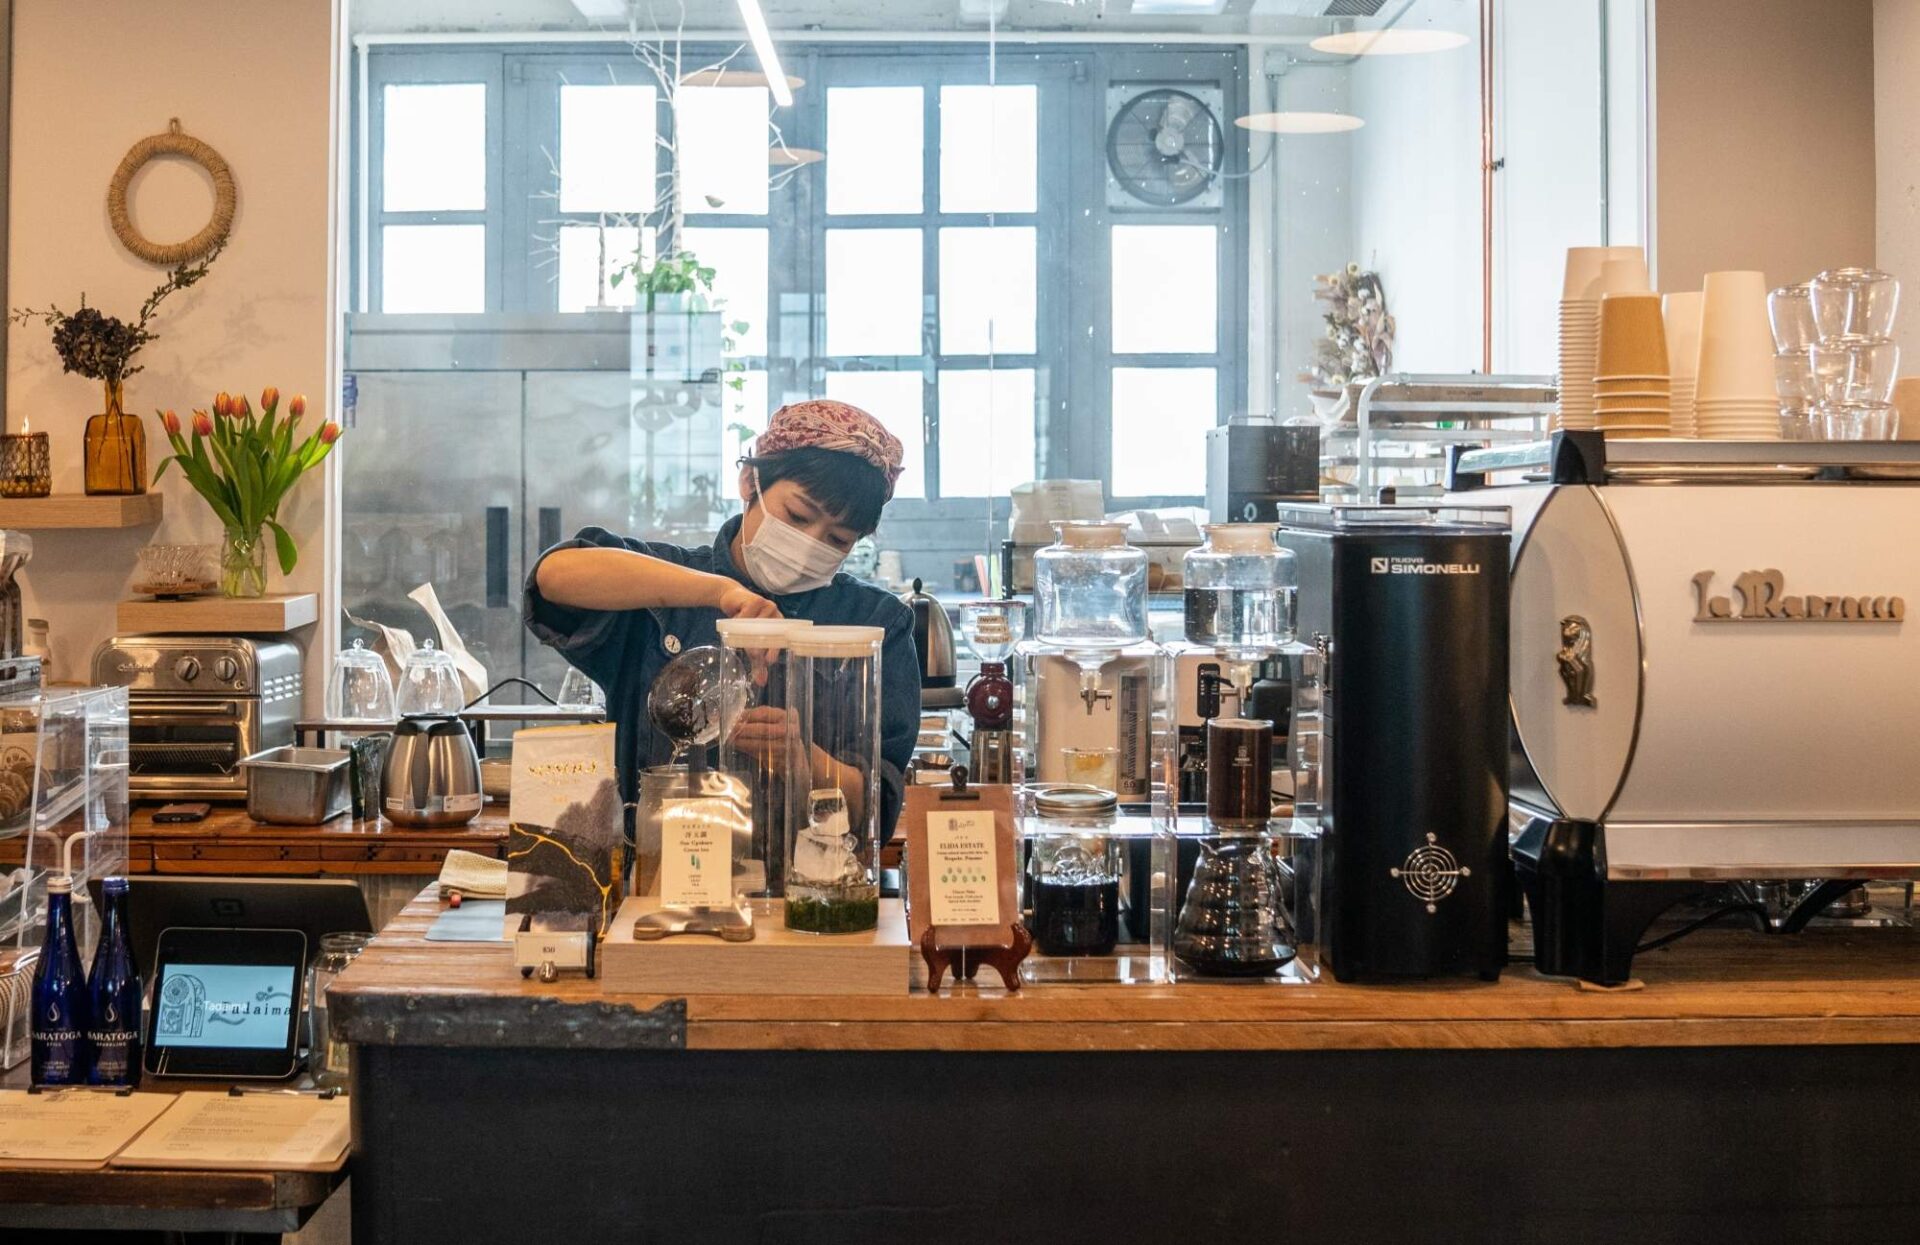 A barista is making a coffee drink.